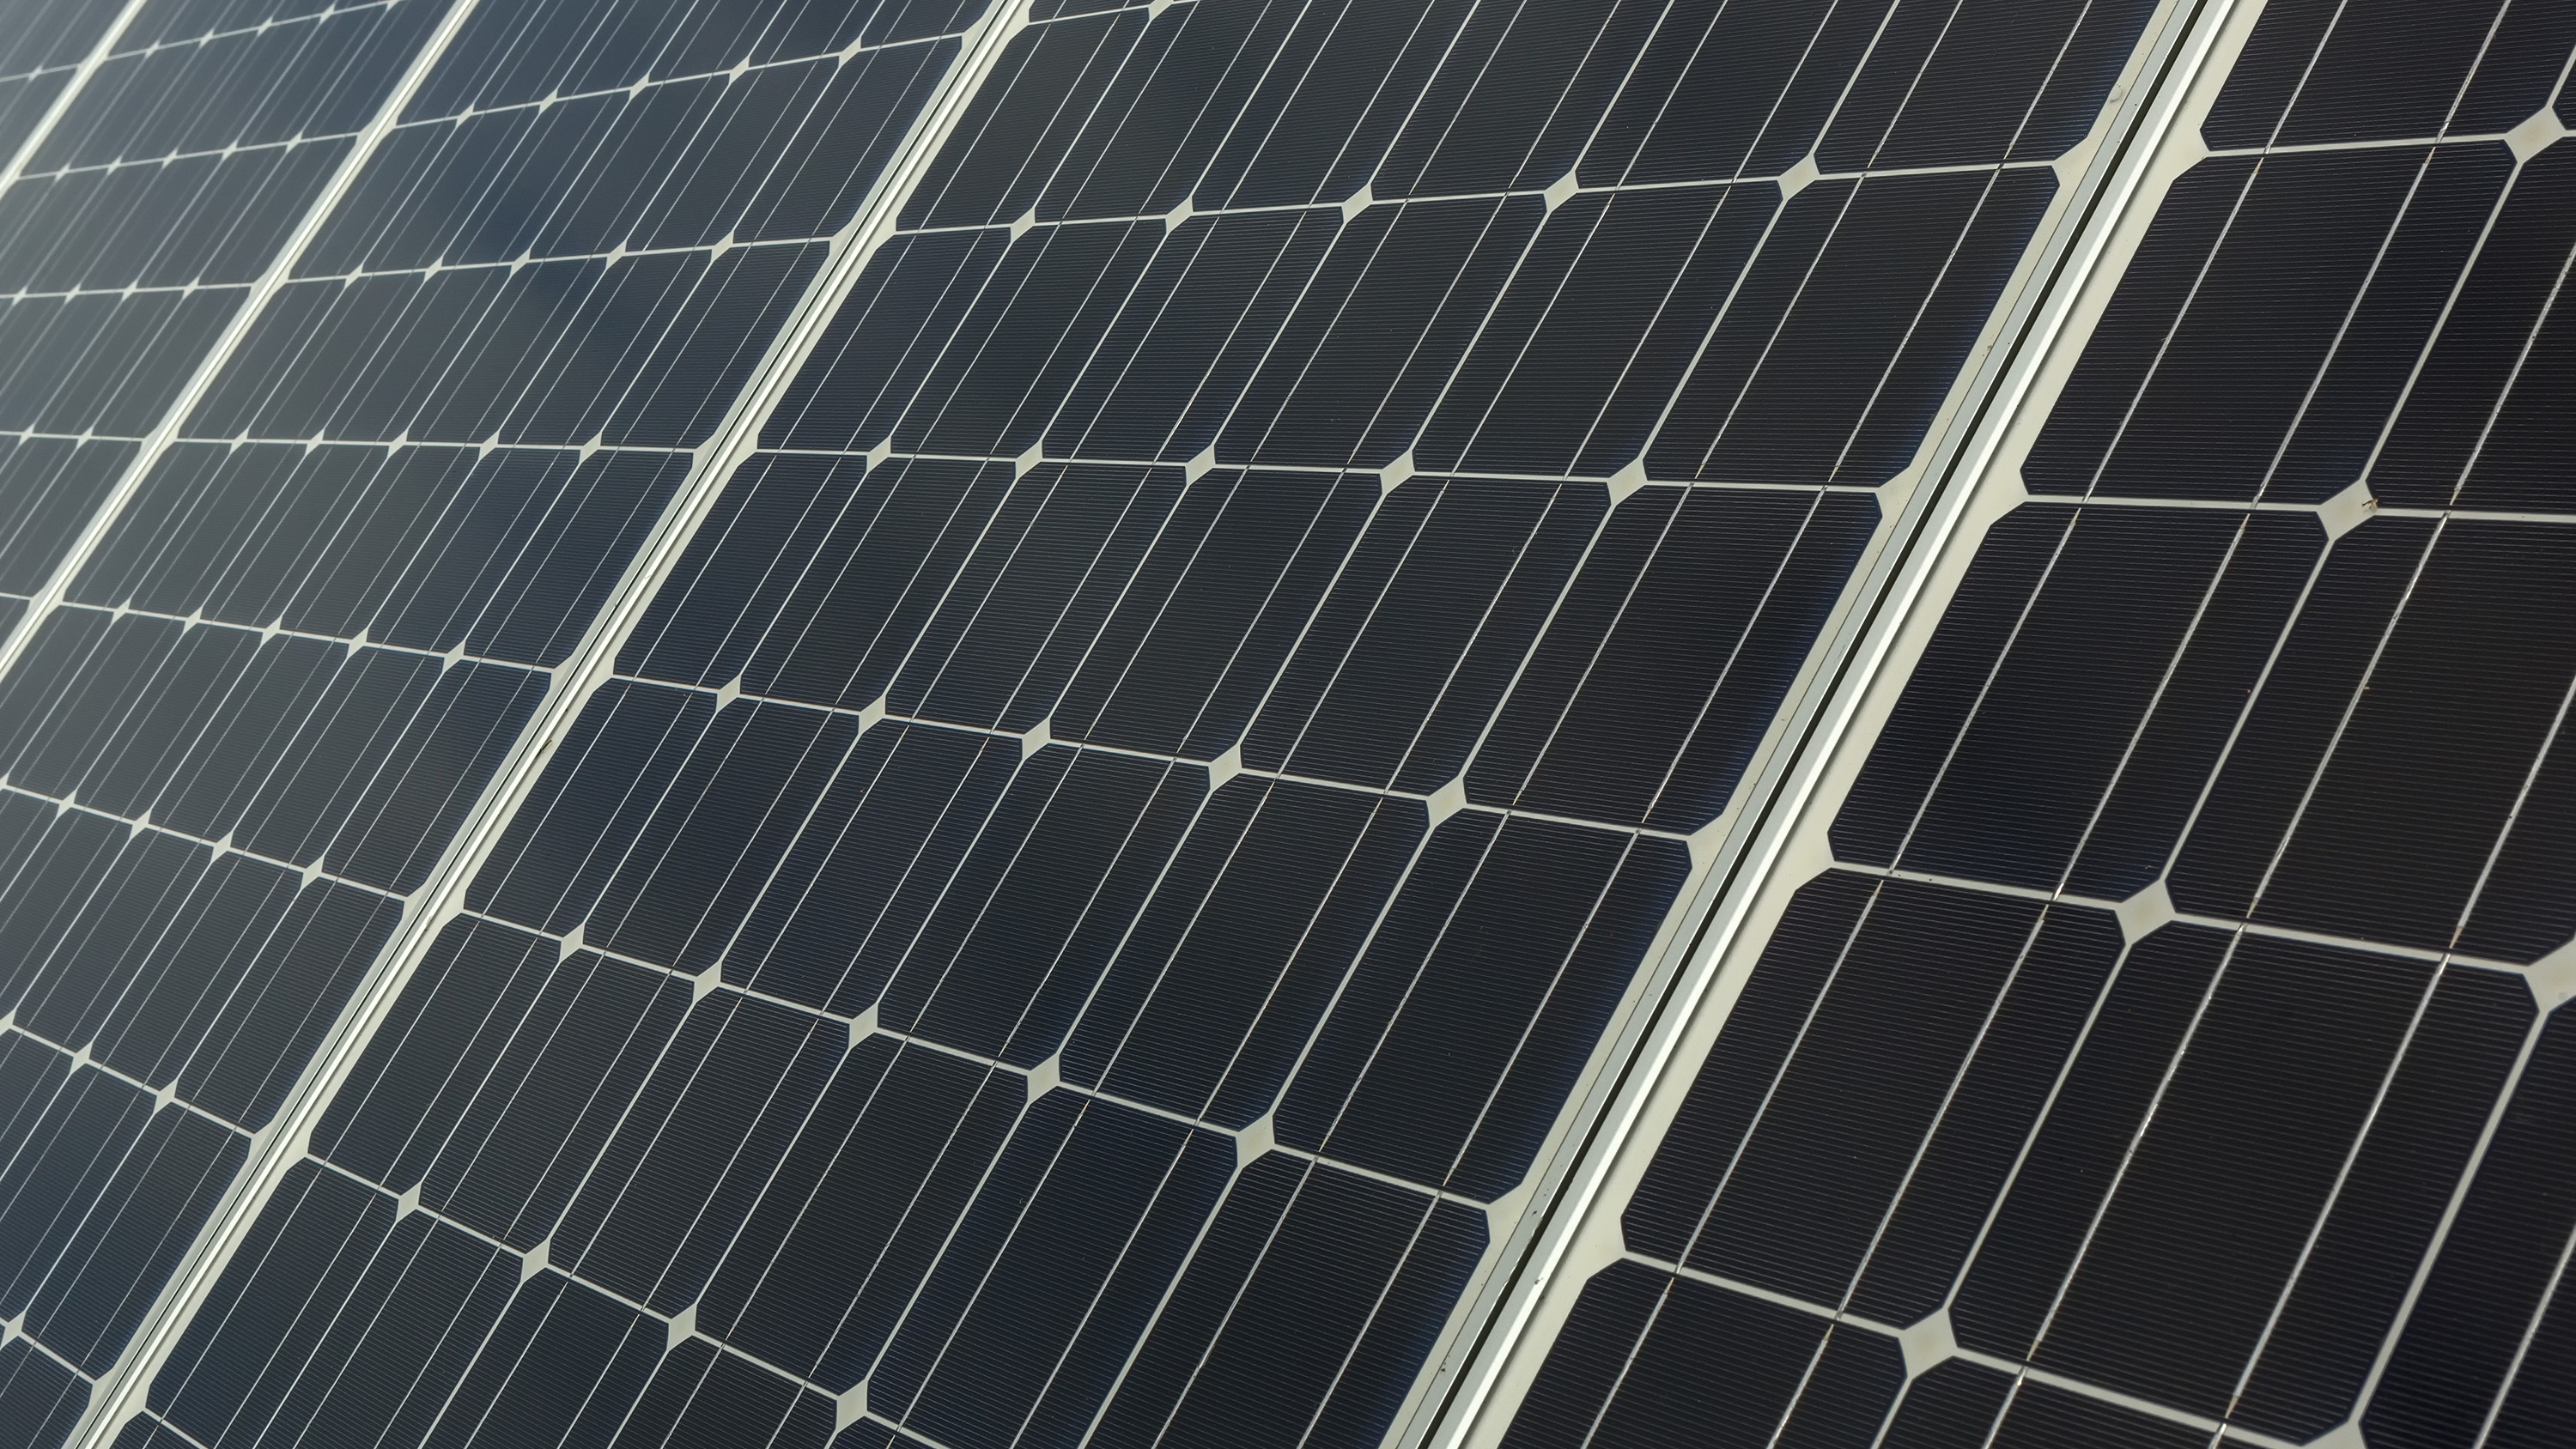 Risk management for the photovoltaics industry